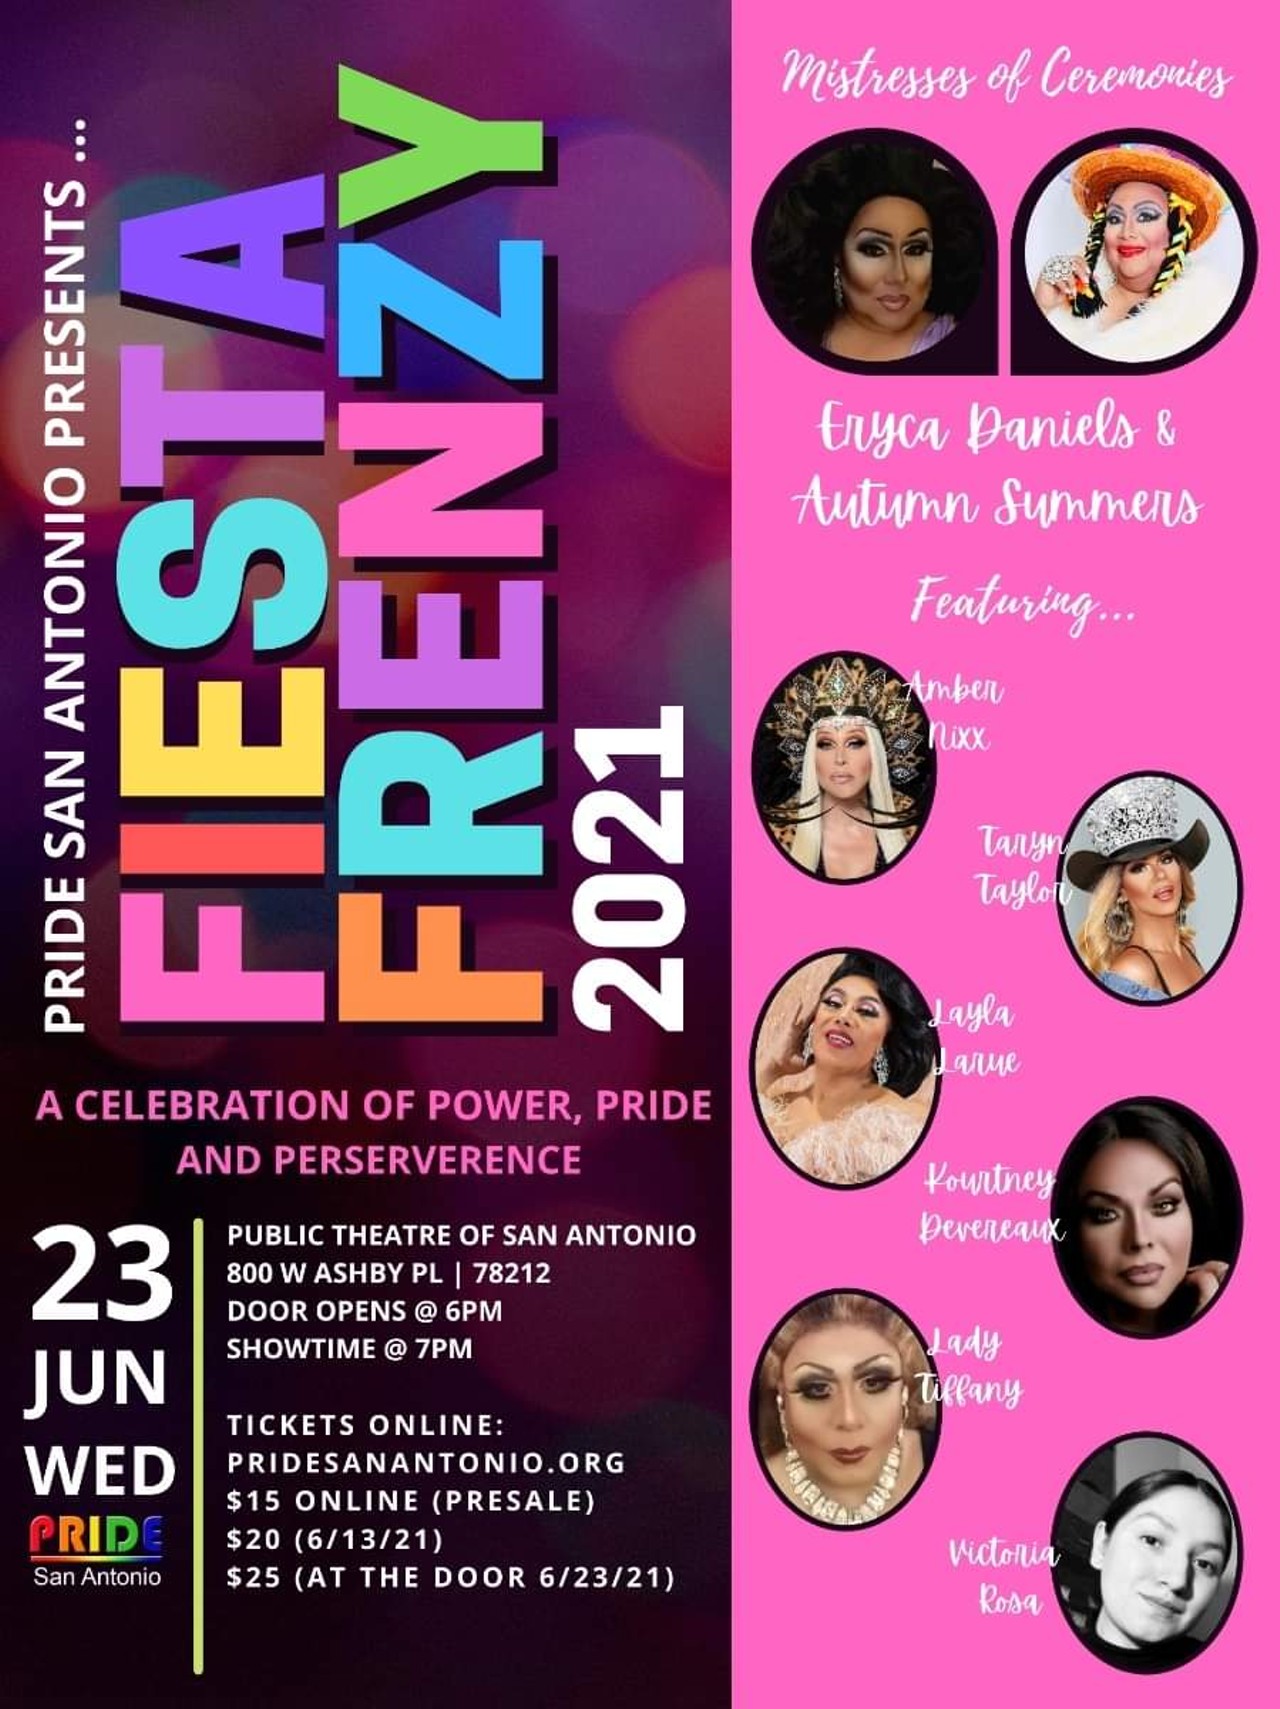 Fiesta Frenzy
$15-$25, 7 p.m., June 23, Public Theater of San Antonio, 800 W Ashby Pl, pridesanantonio.org
Celebrate power, pride, and perseverance in PRIDE San Antonio’s Fiesta Frenzy, hosted by the Mistresses of Ceremonies Eryca Daniels and Autumn Summers. The show features local queens Amber Nixx, Taryn Taylor, Layla LaRue, Kourtney Deveraux, Lady Tiffany and Victoria Rosa.
Photo via Facebook / Pride San Antonio